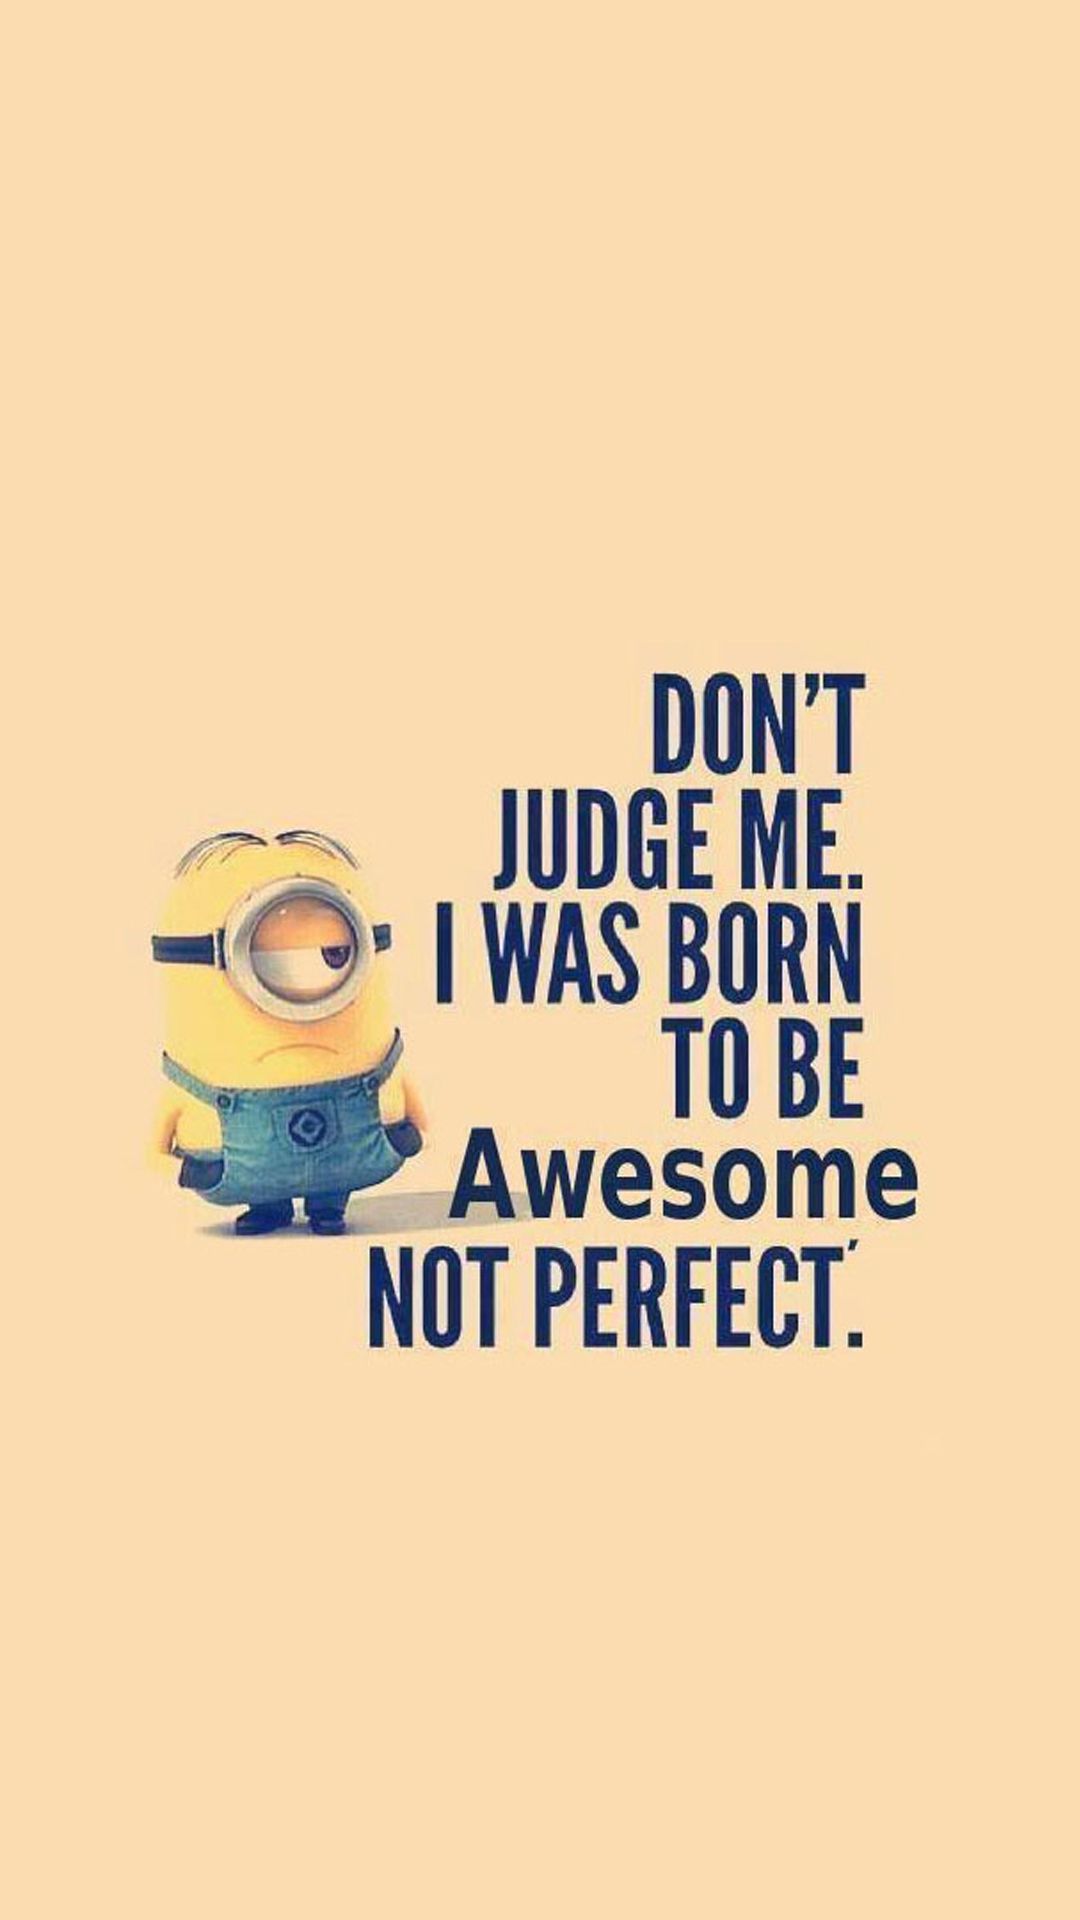 Funny iPhone Wallpaper Free To Download. Funny iphone wallpaper, Funny minion quotes, Minion wallpaper iphone